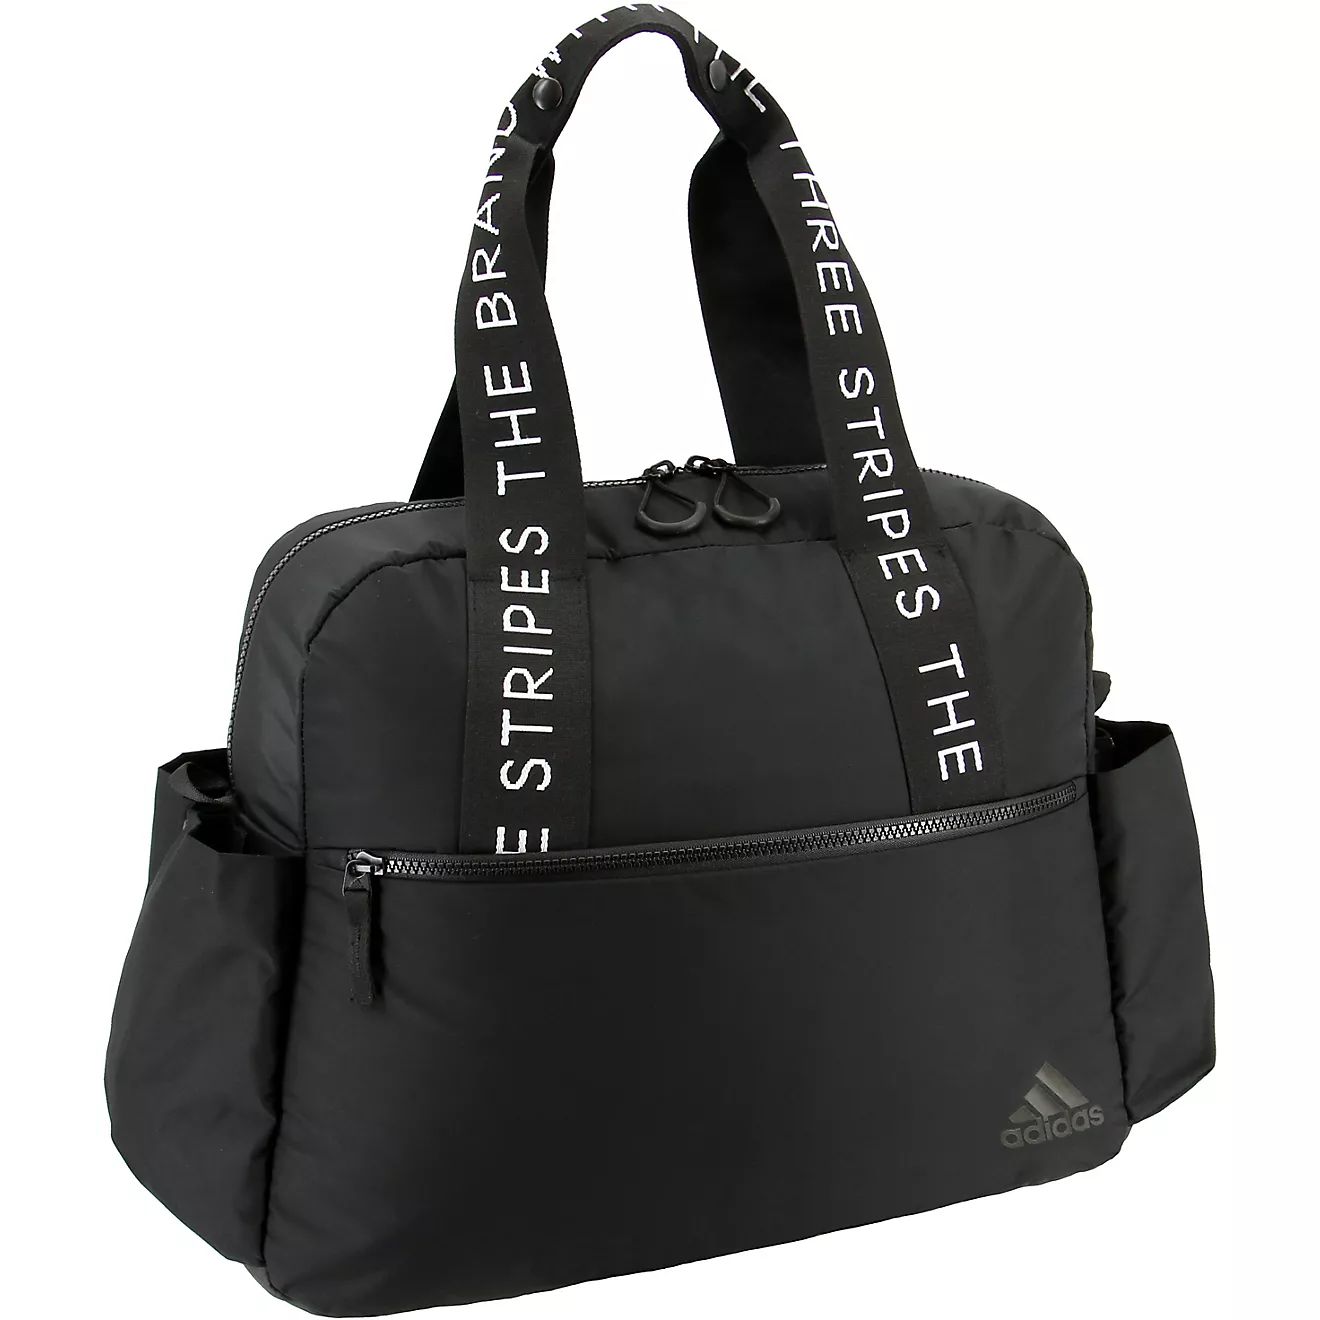 adidas Sport to Street Tote Bag | Academy | Academy Sports + Outdoors